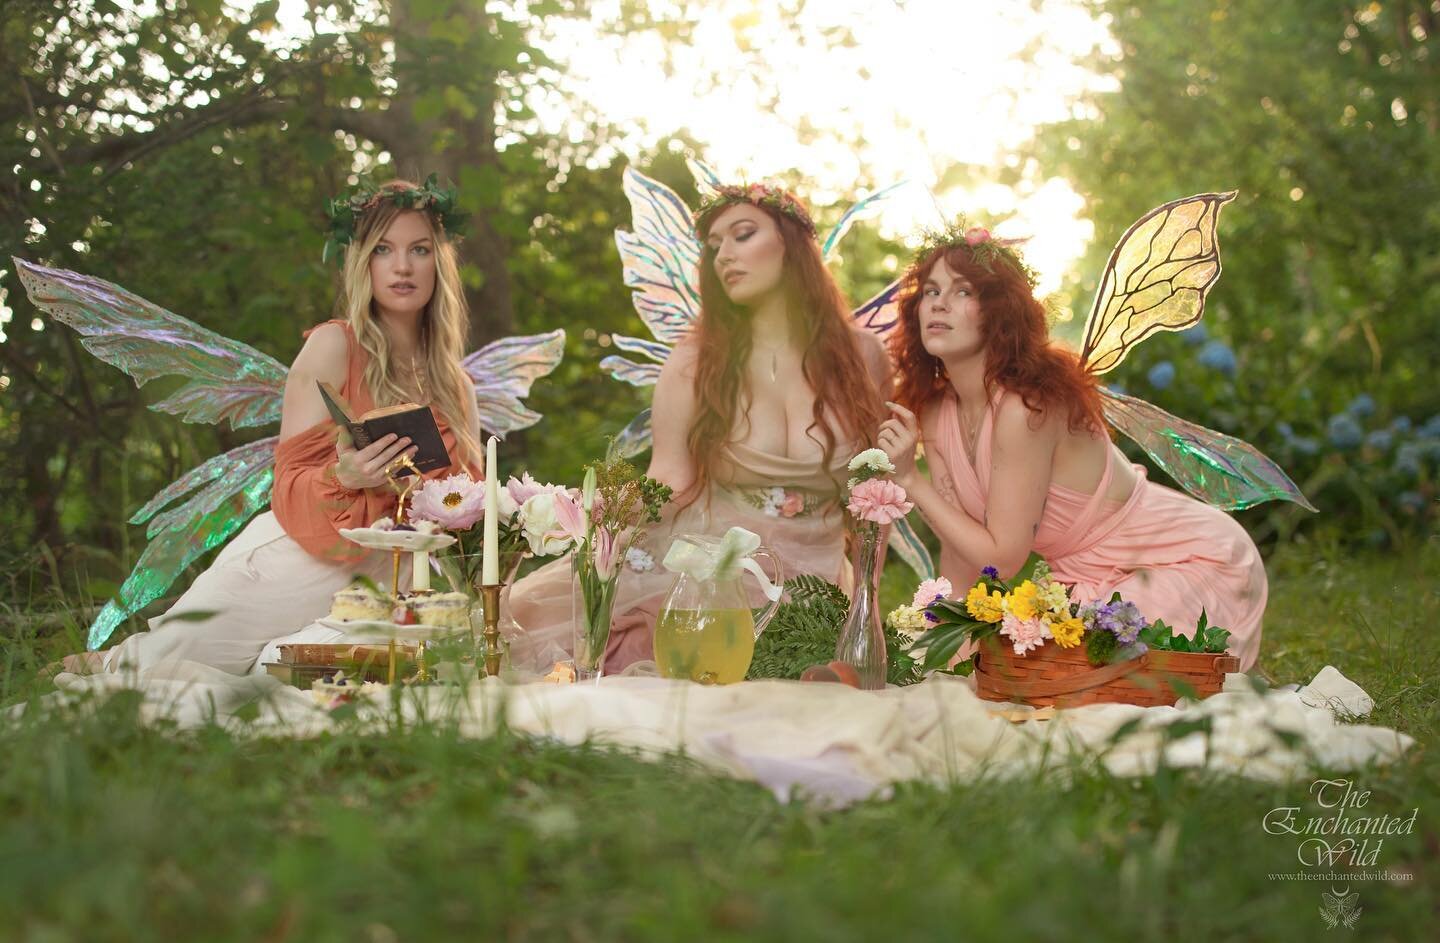 Sharing the joy of a faerie picnic with my chosen family. 
I&rsquo;ve been wanting to offer picnic group photo sessions for a while and figured it was the perfect excuse to finally get photos of the three of us together. This is the team behind a lot